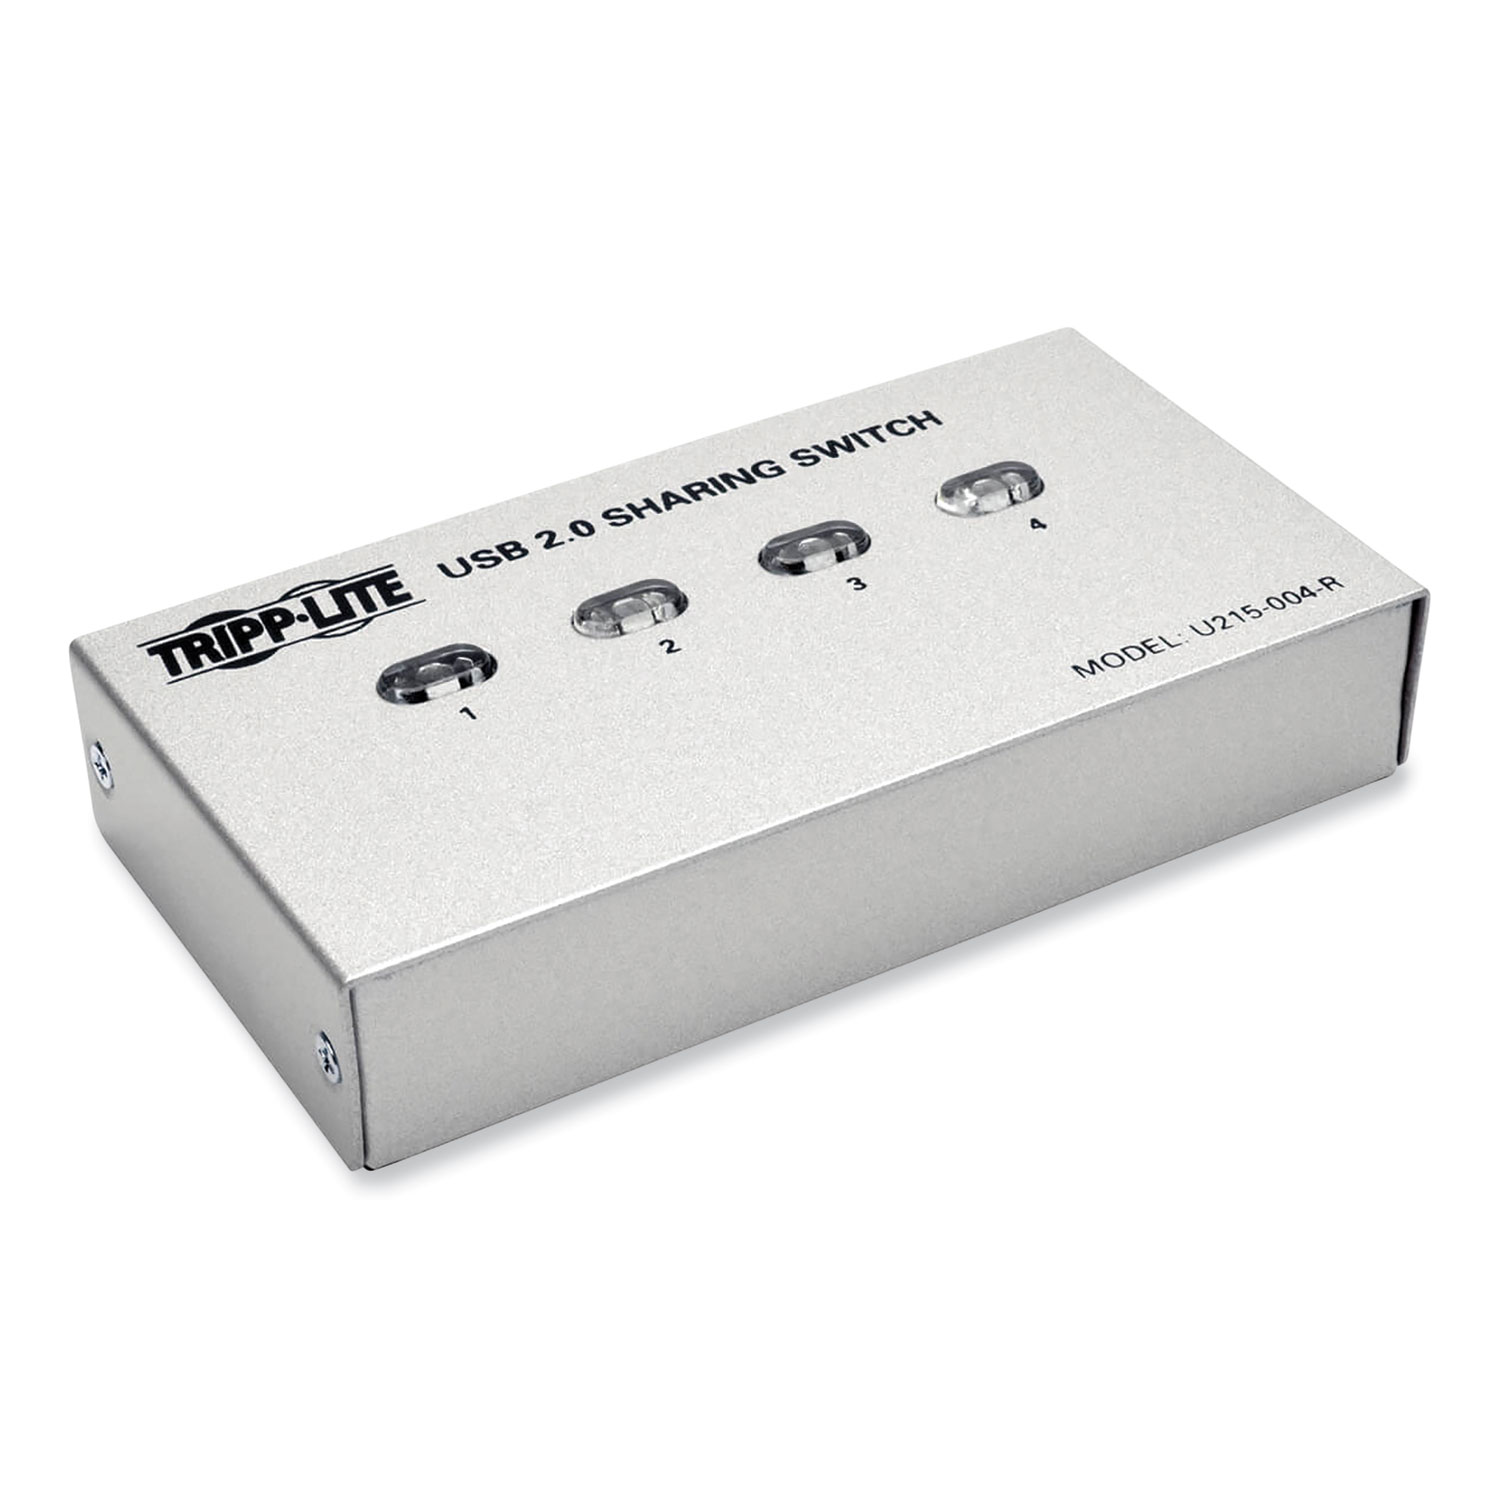 USB 2.0 Printer/Peripheral Sharing Switch, 4 - Solutions